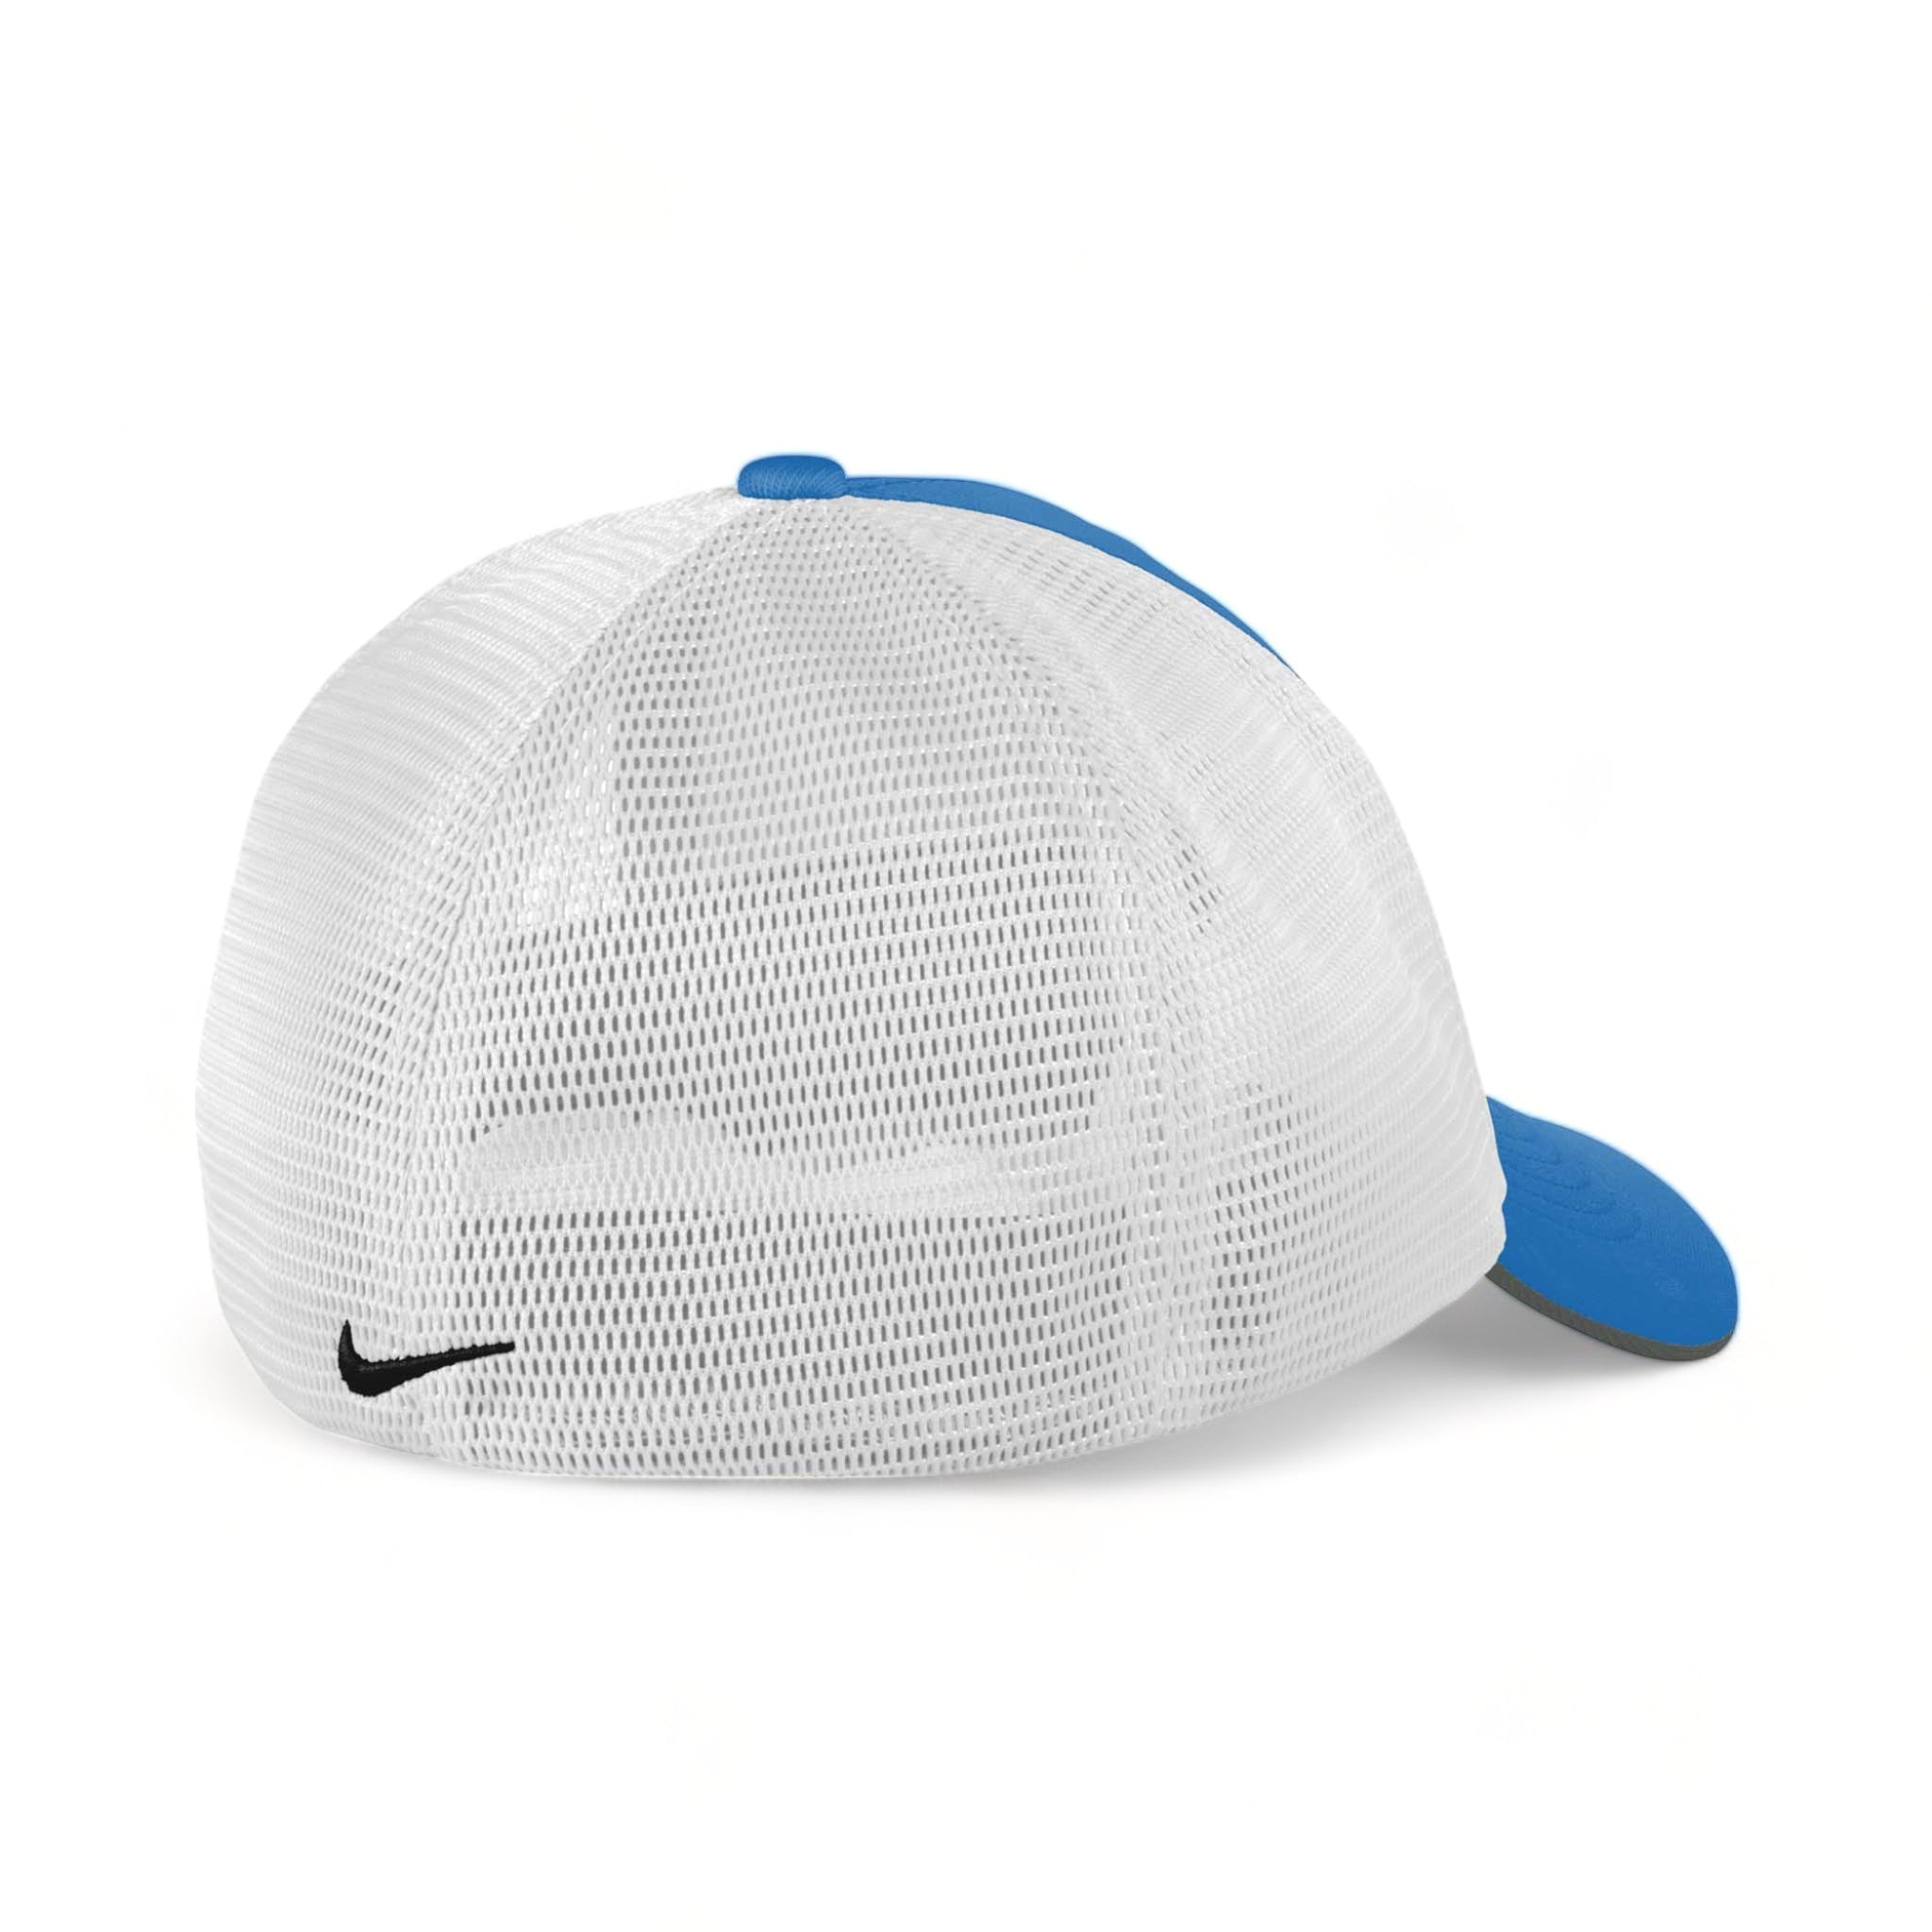 Back view of Nike NKFB6448 custom hat in gym blue and white